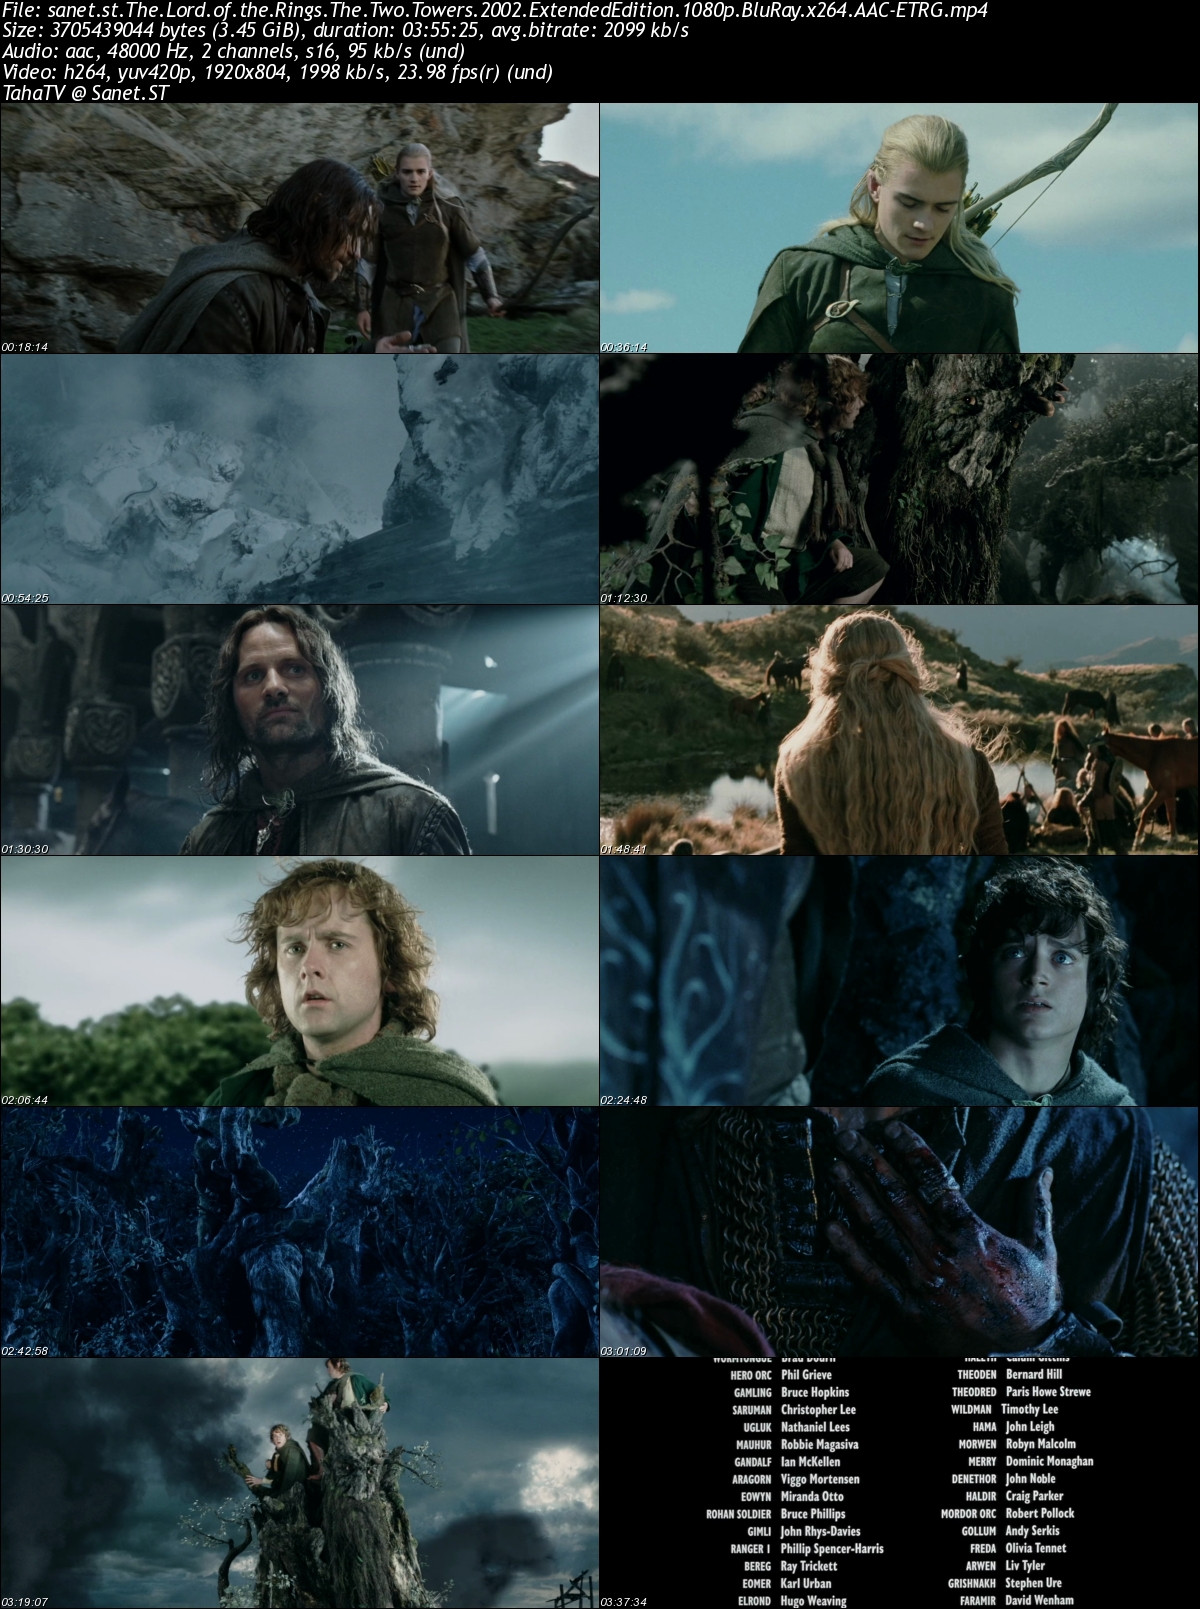 the lord of the rings extended trilogy 1080p